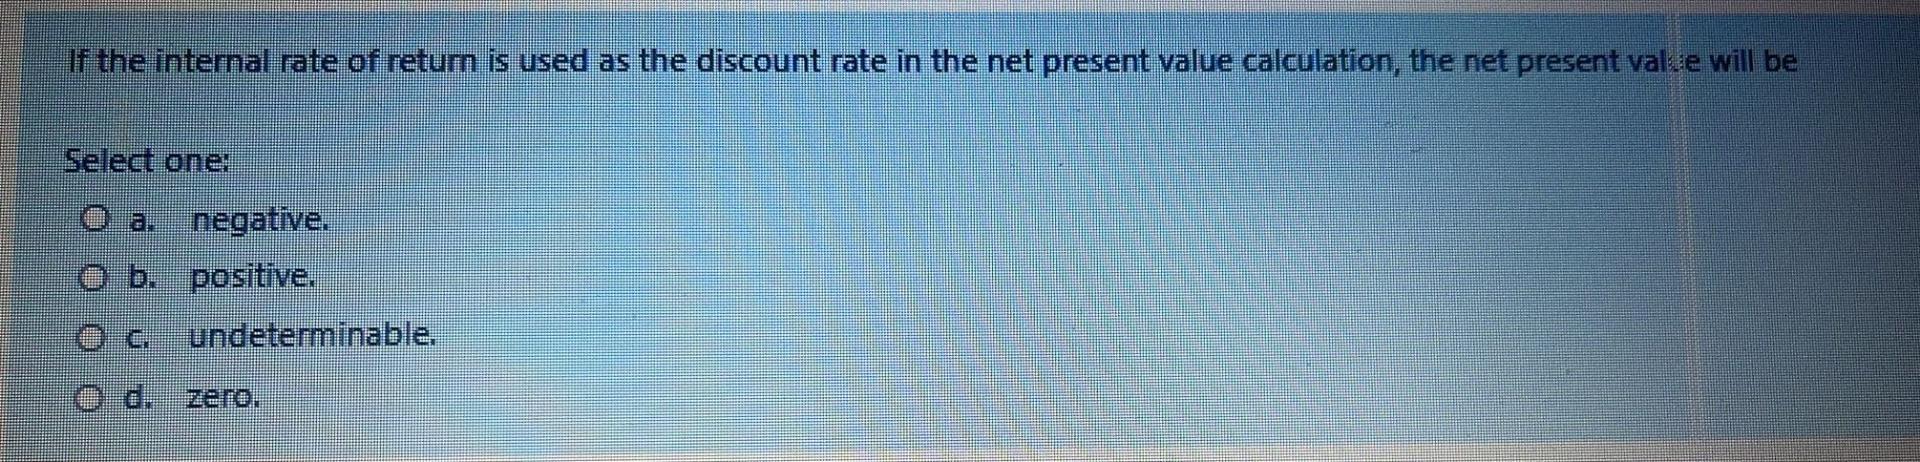 If the internal rate of retum is used as the discount rate in the net present value calculation, the net present valse will b